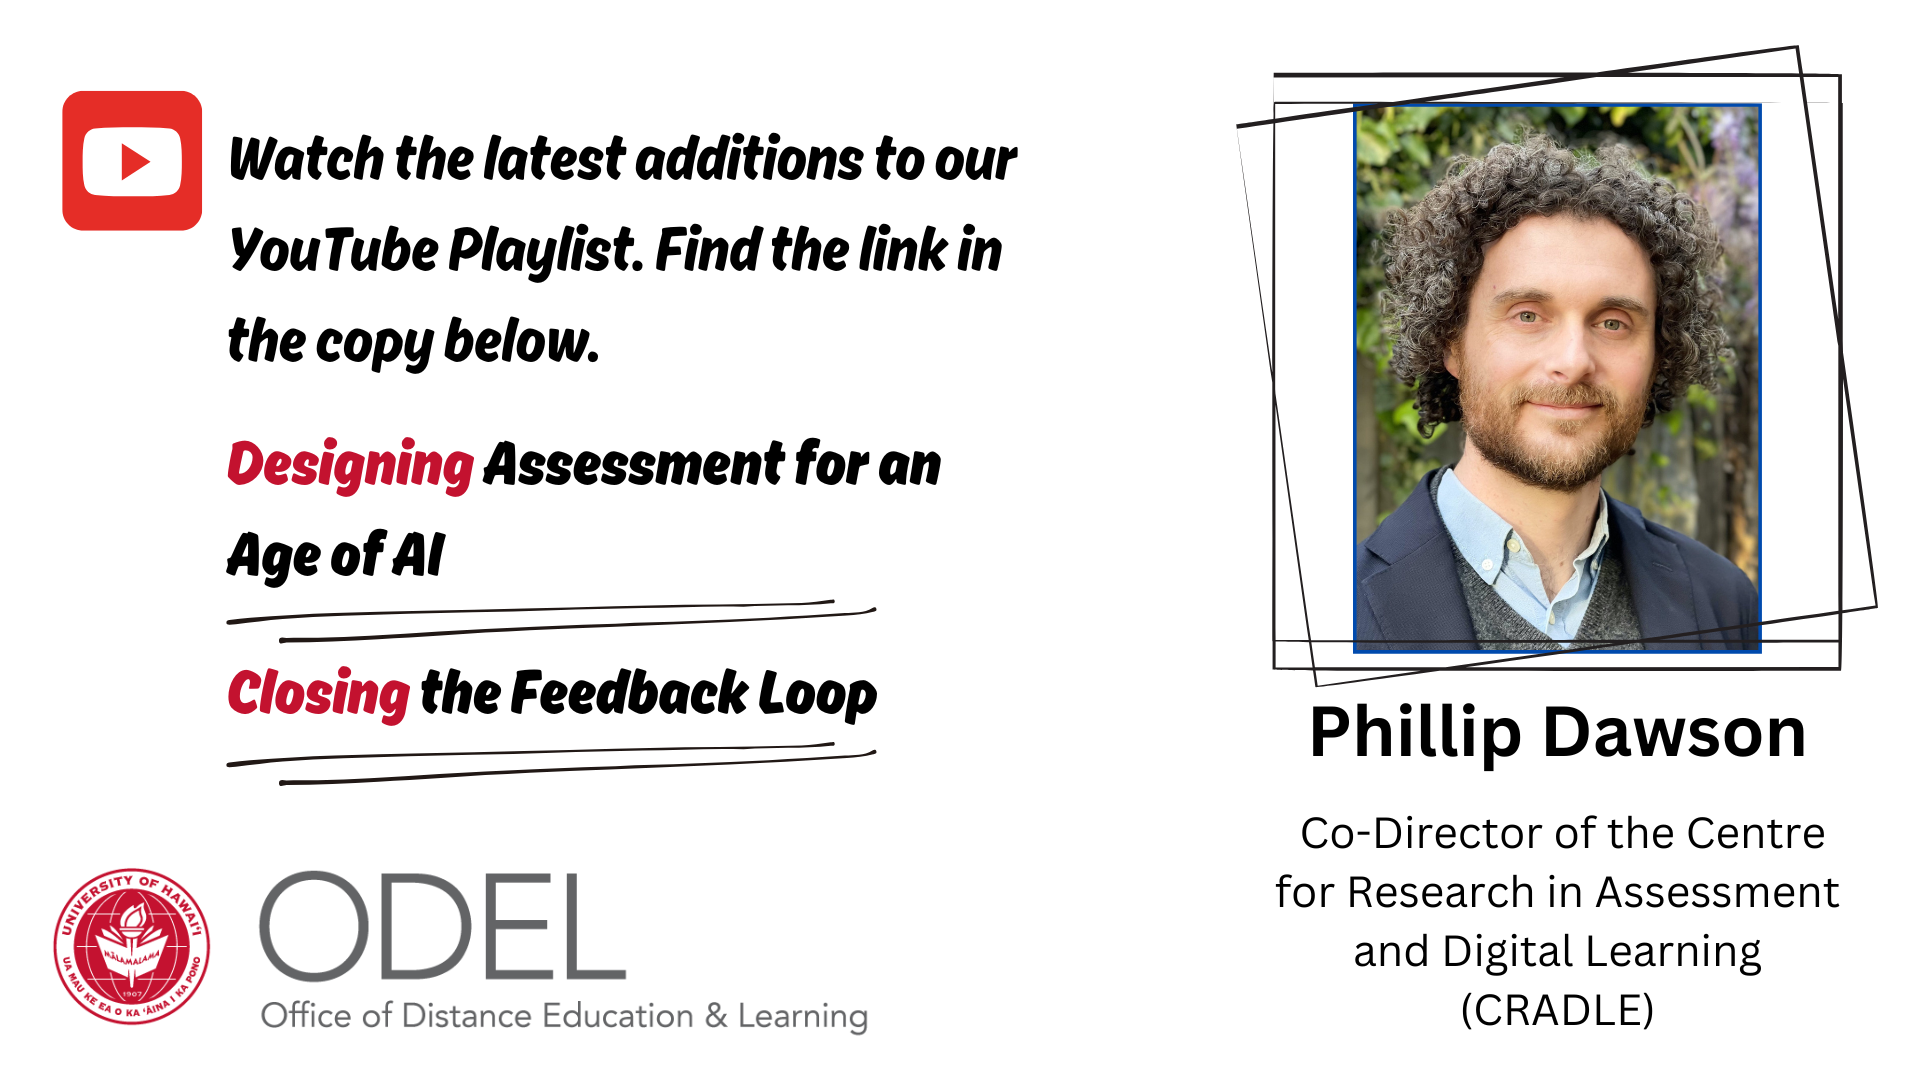 Watch the latest additions to our YouTube Playlist. Find the link in the copy below. Designing Assessment for an Age of AI. Closing the Feedback Loop.